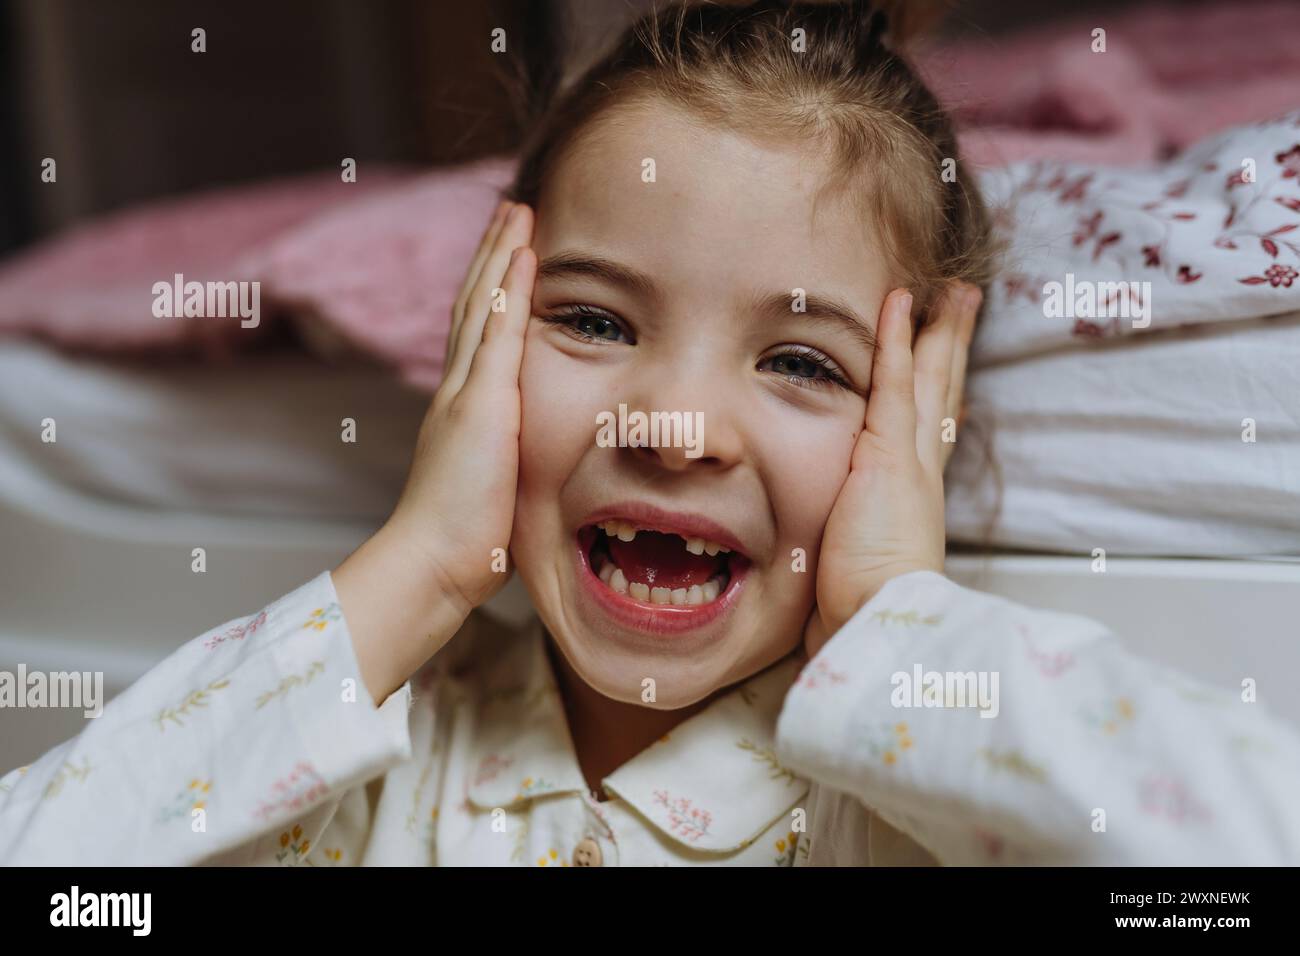 Portrait of cute girl smiling with gap-toothed grin, missing her baby teeth. Stock Photo